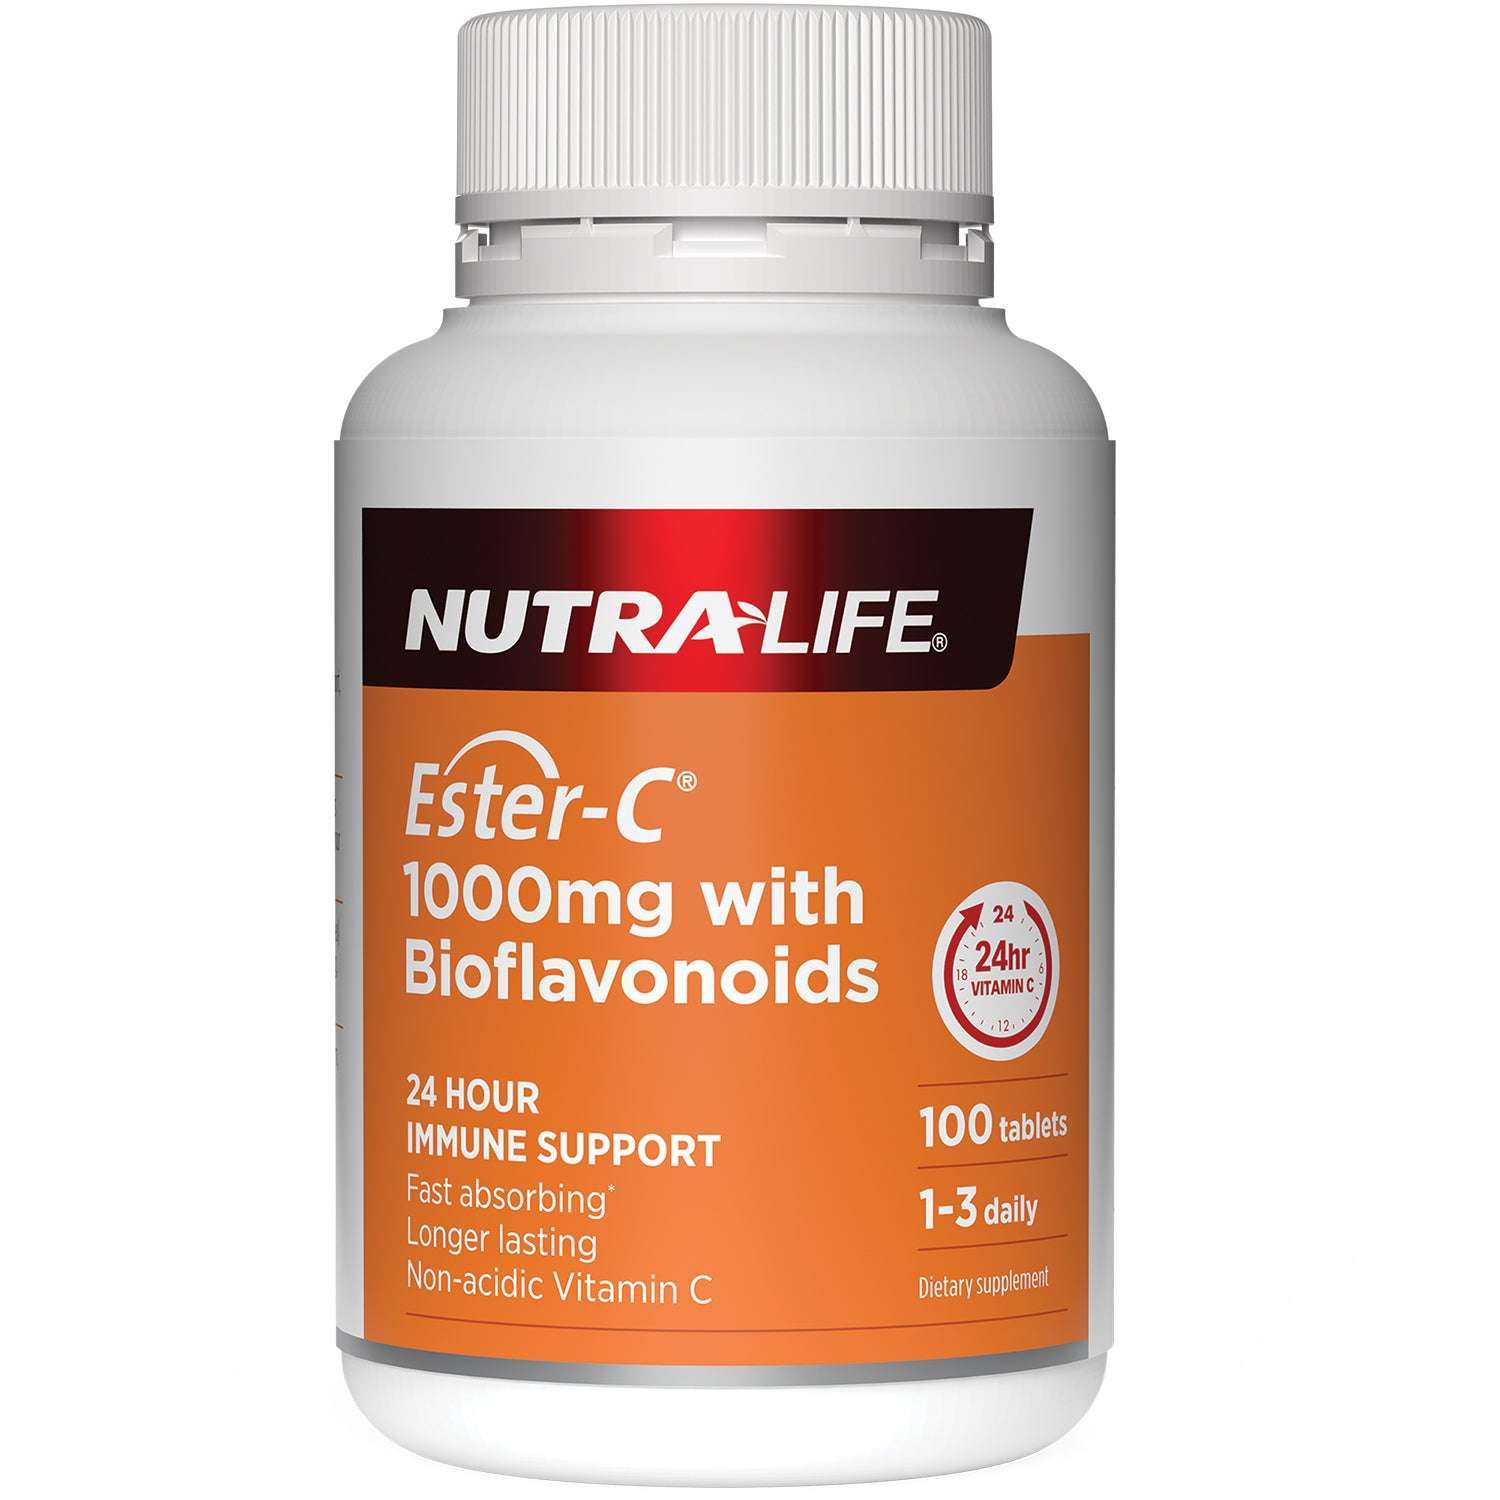 Nutra-life Ester-C 1000mg with Bioflavonoids 100 tablets